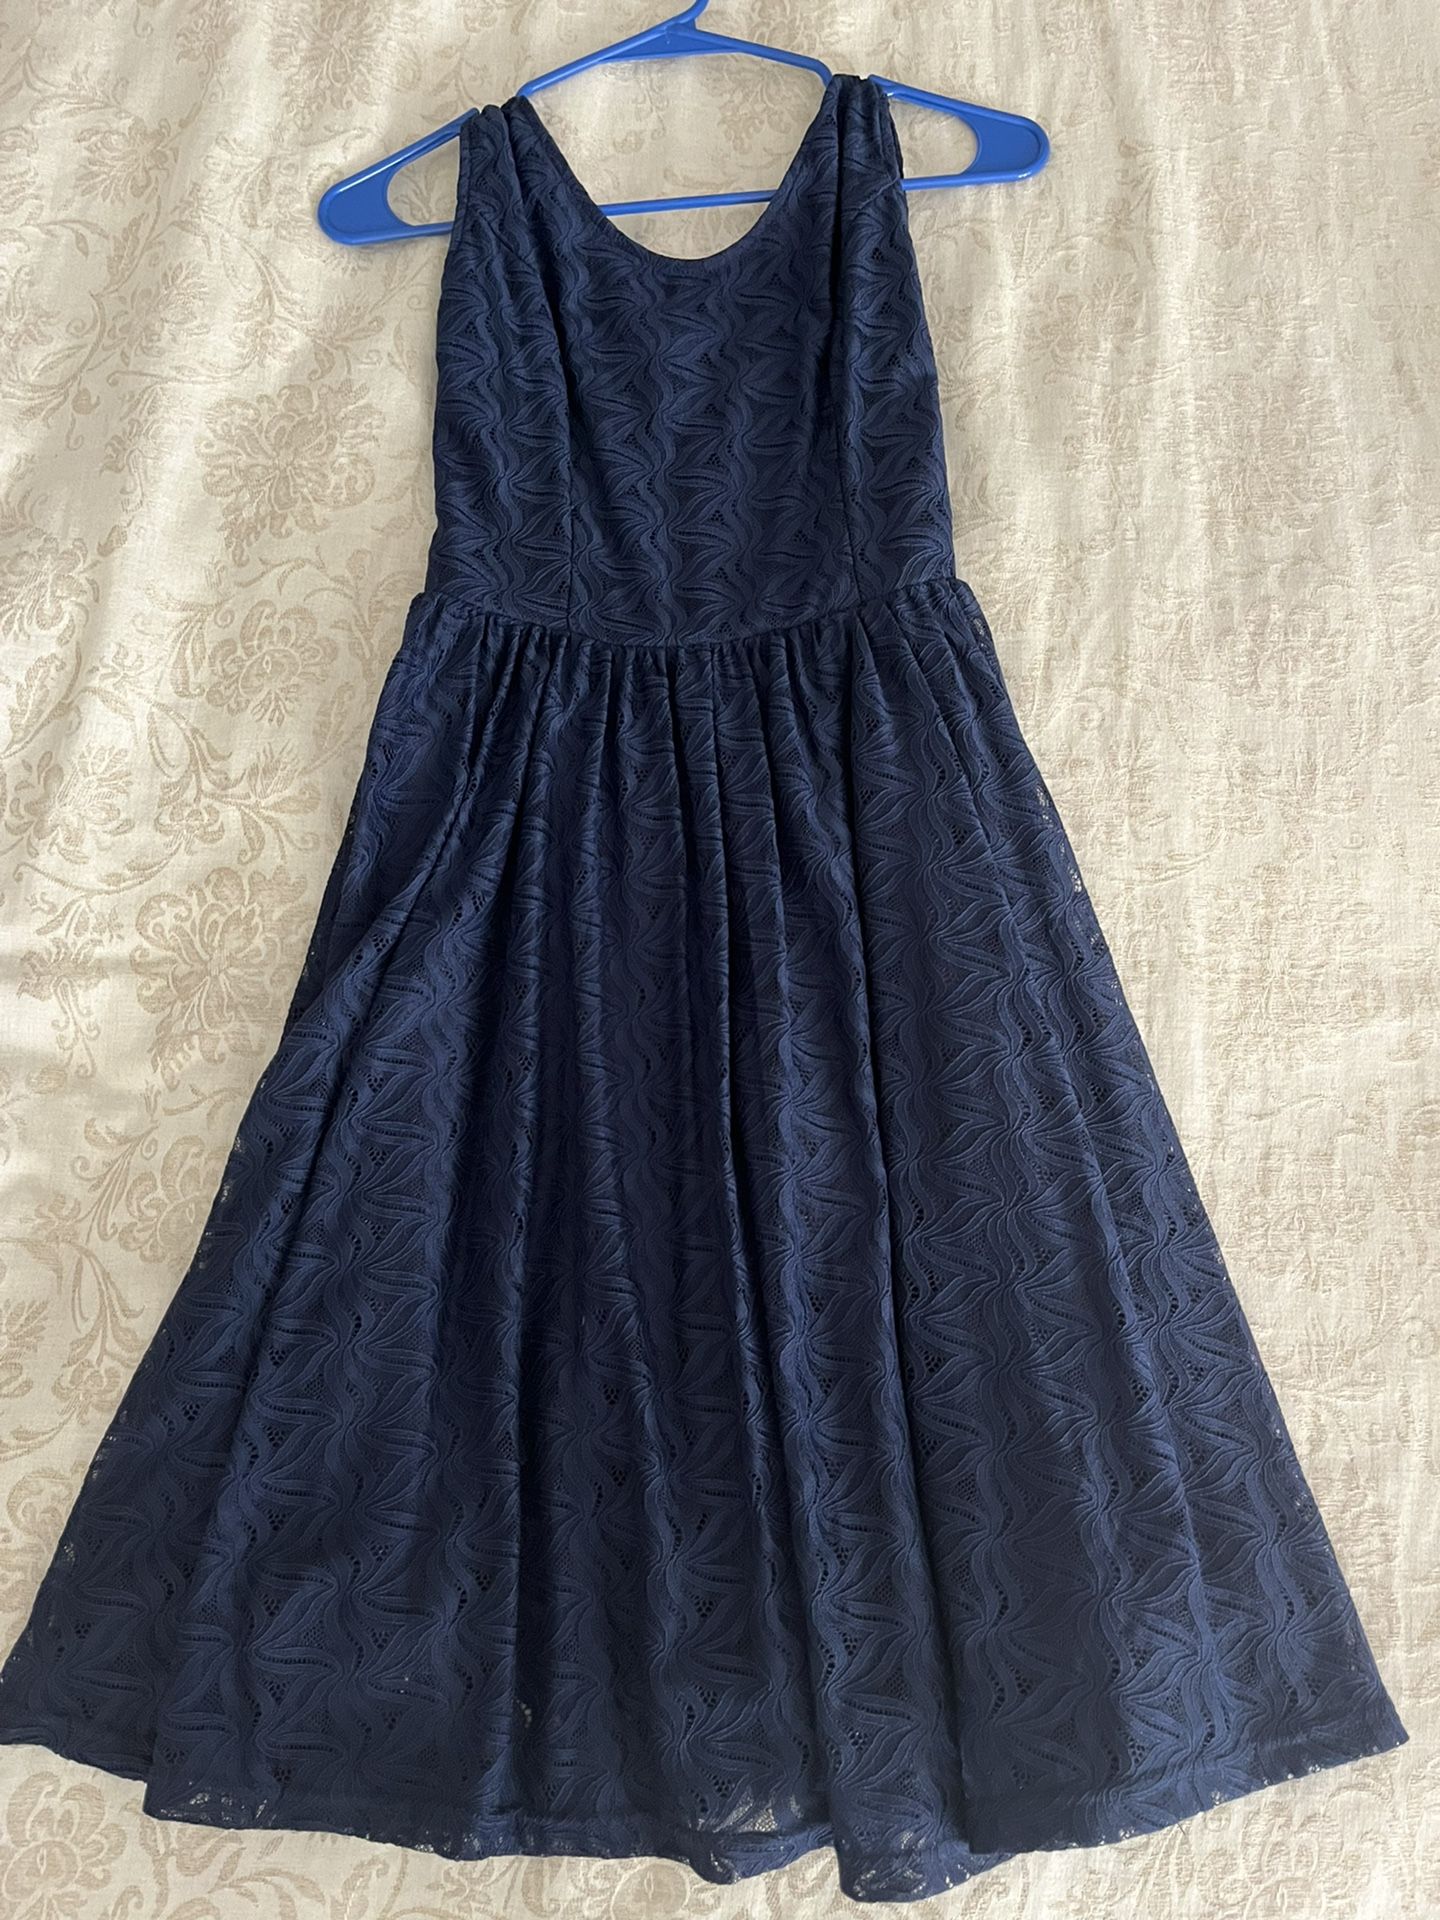 GIRLS BOUTIQUE SIZE S NAVY BLUE FANCY PARTY DRESS WEDDING PAGEANT — BEAUTIFUL CONDITION!